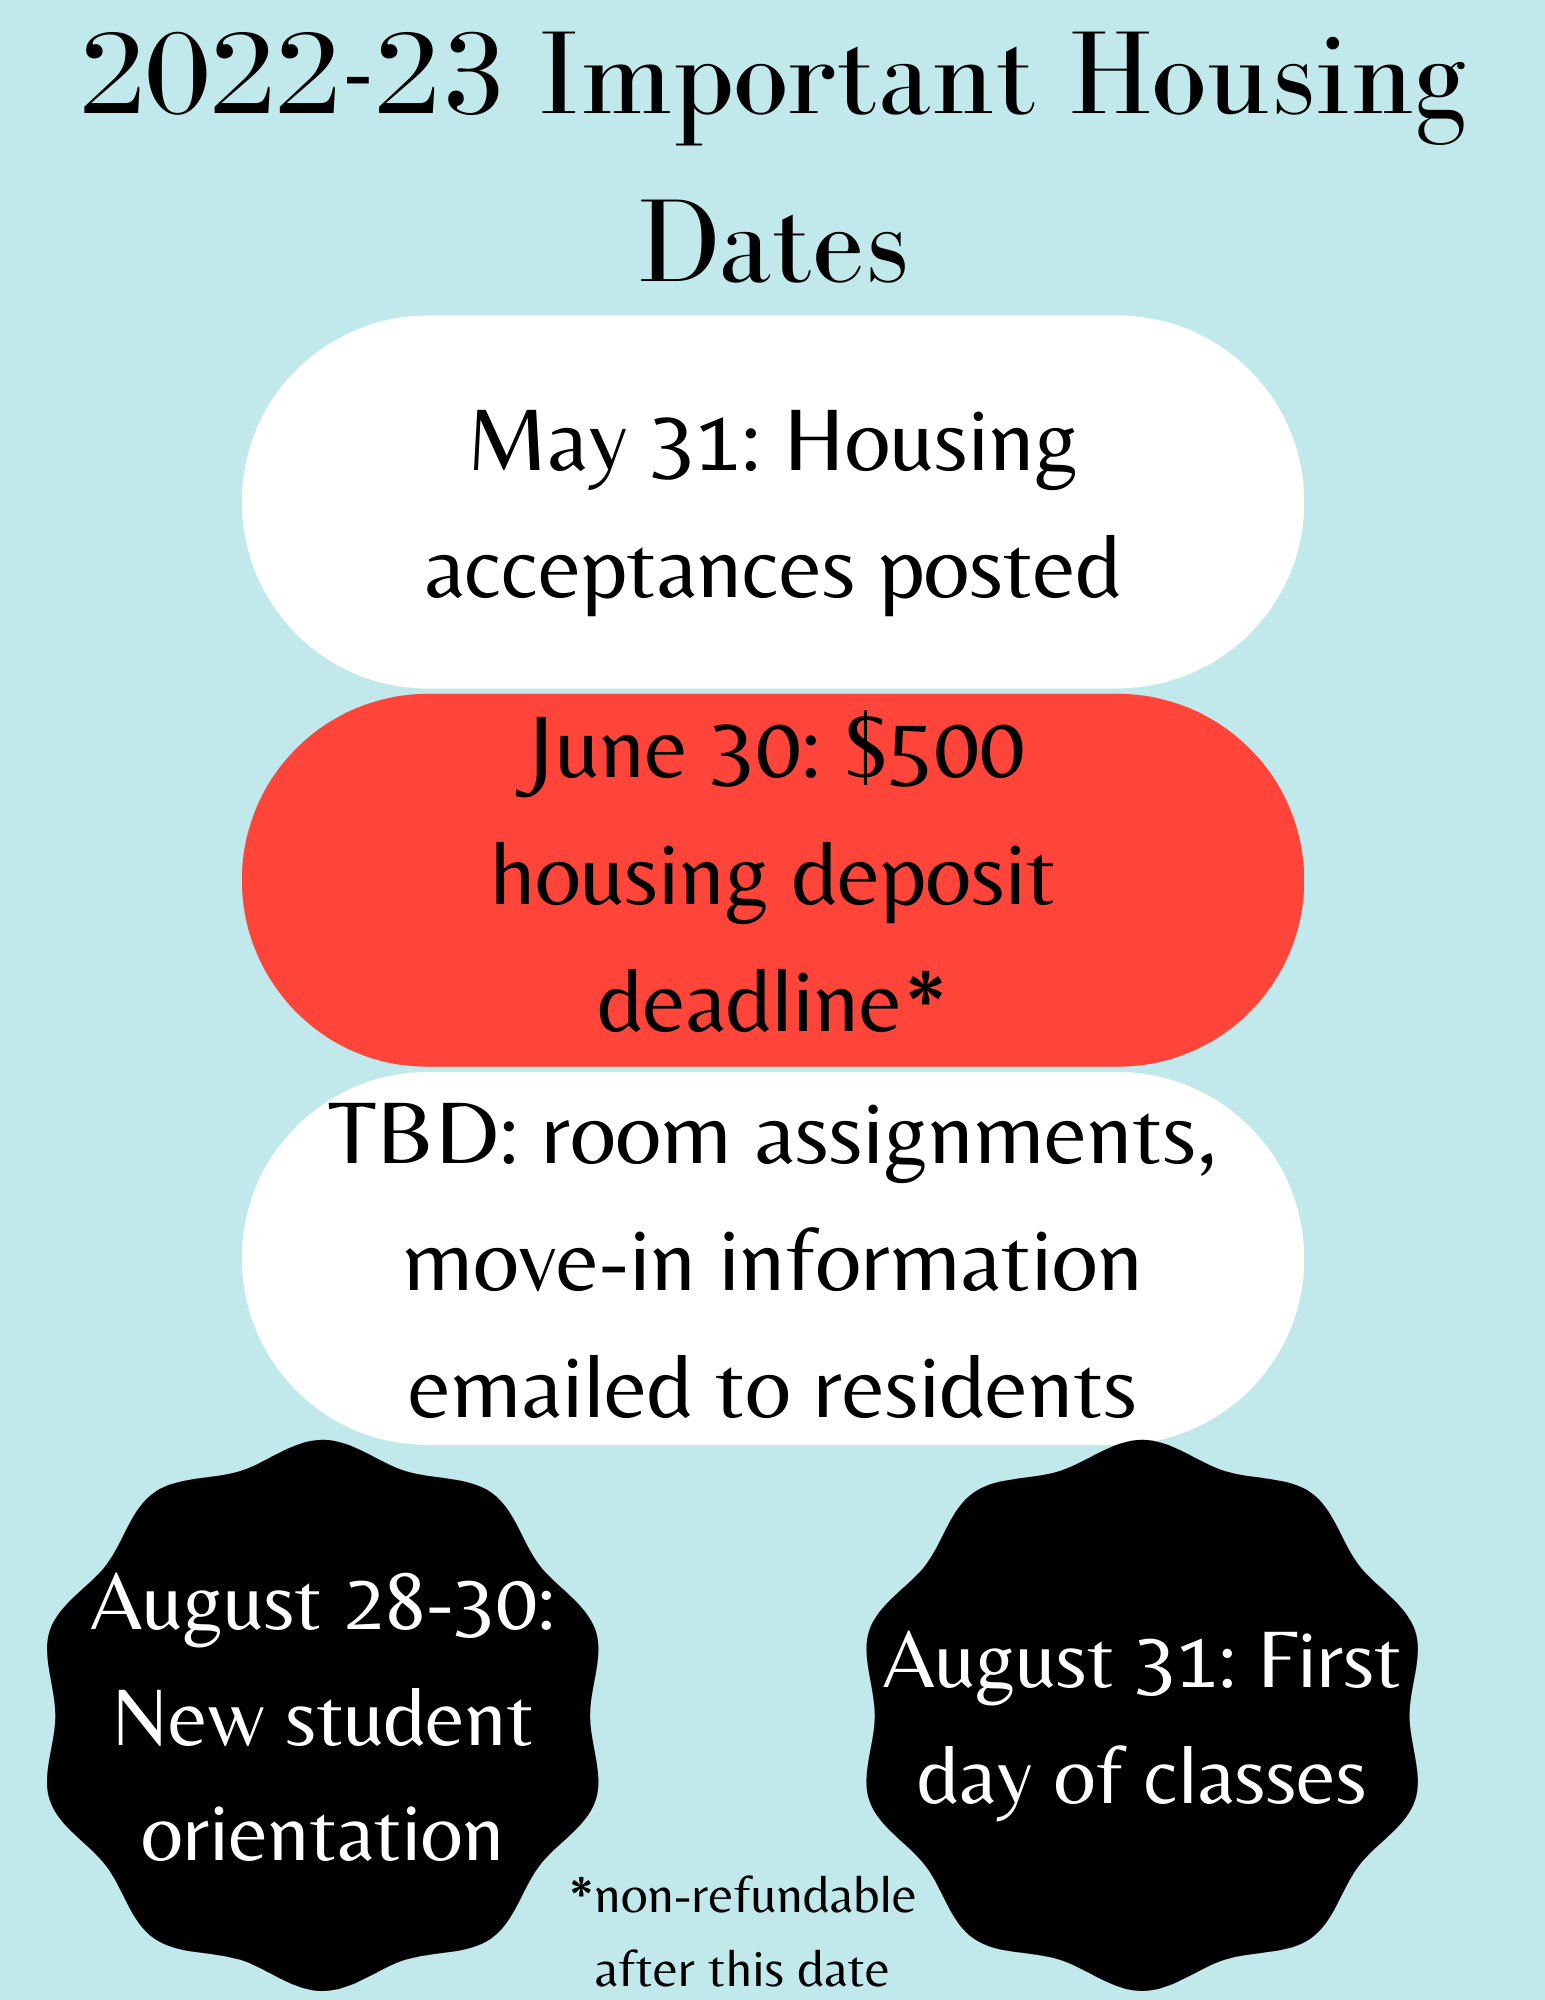 Image containing important housing application dates.